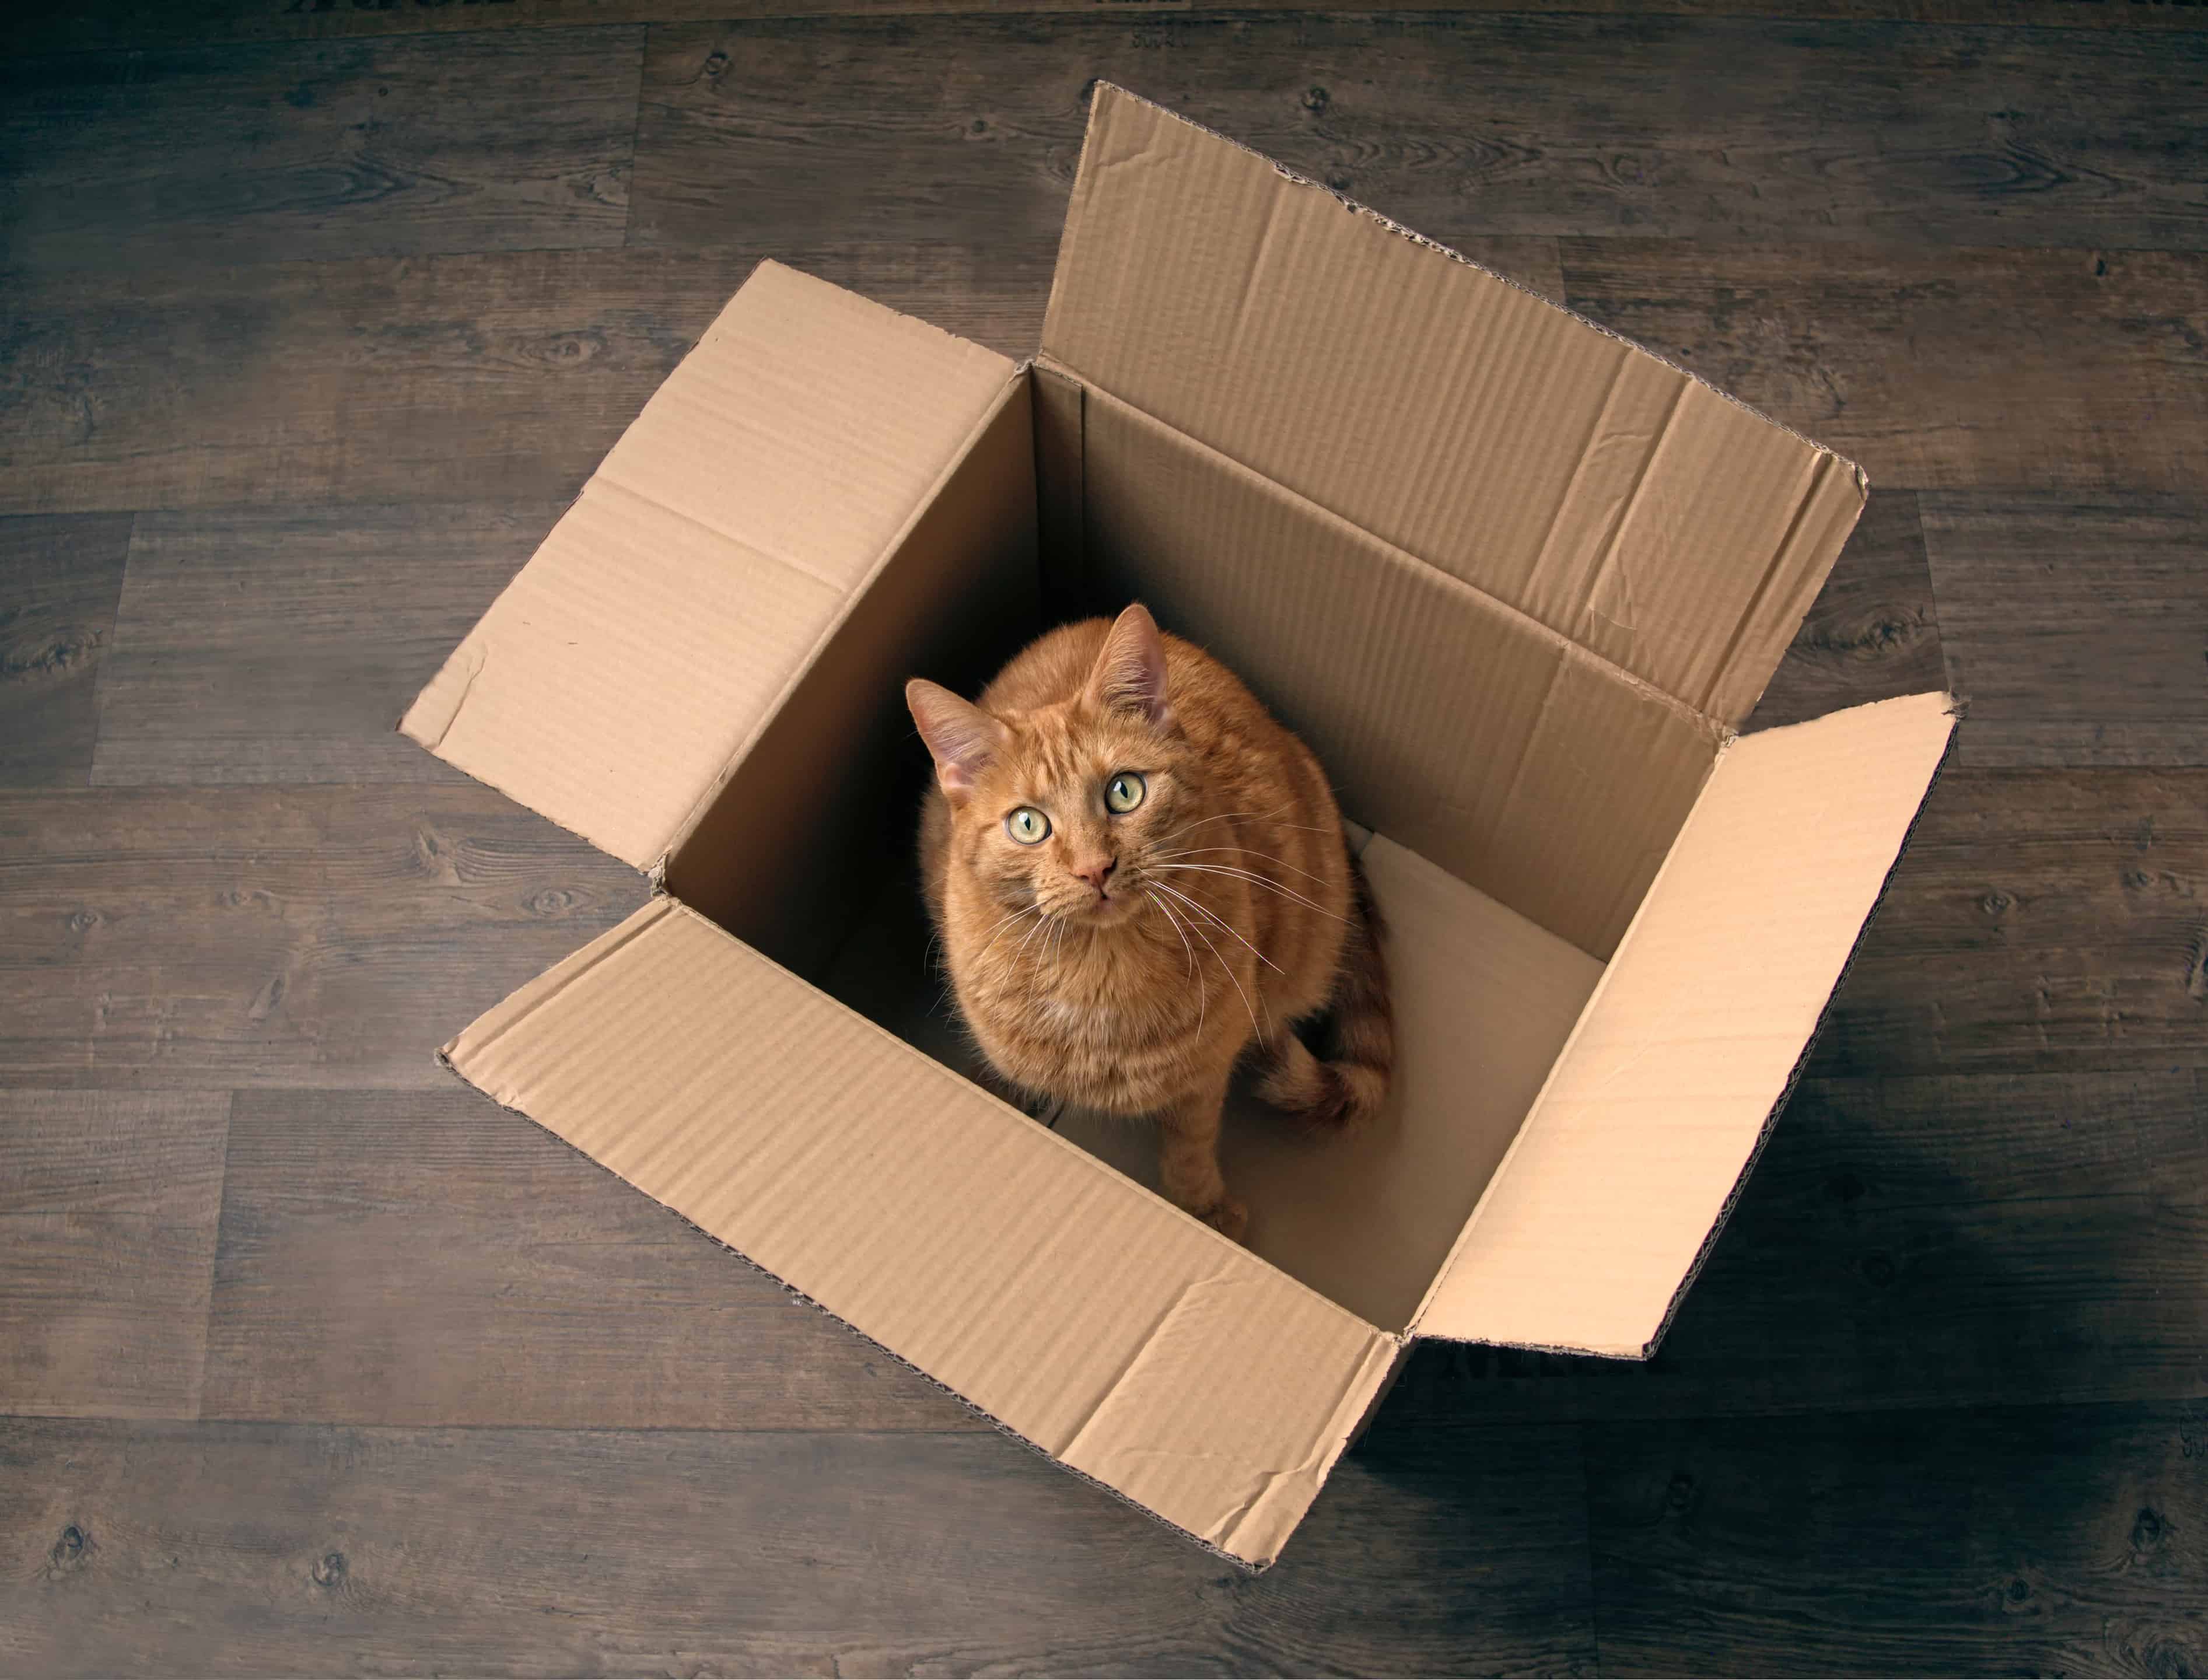 How To Move With Pets - Cute ginger cat sitting in a cardboard box on a wooden floor and looking curious to the camera. - Mayflower